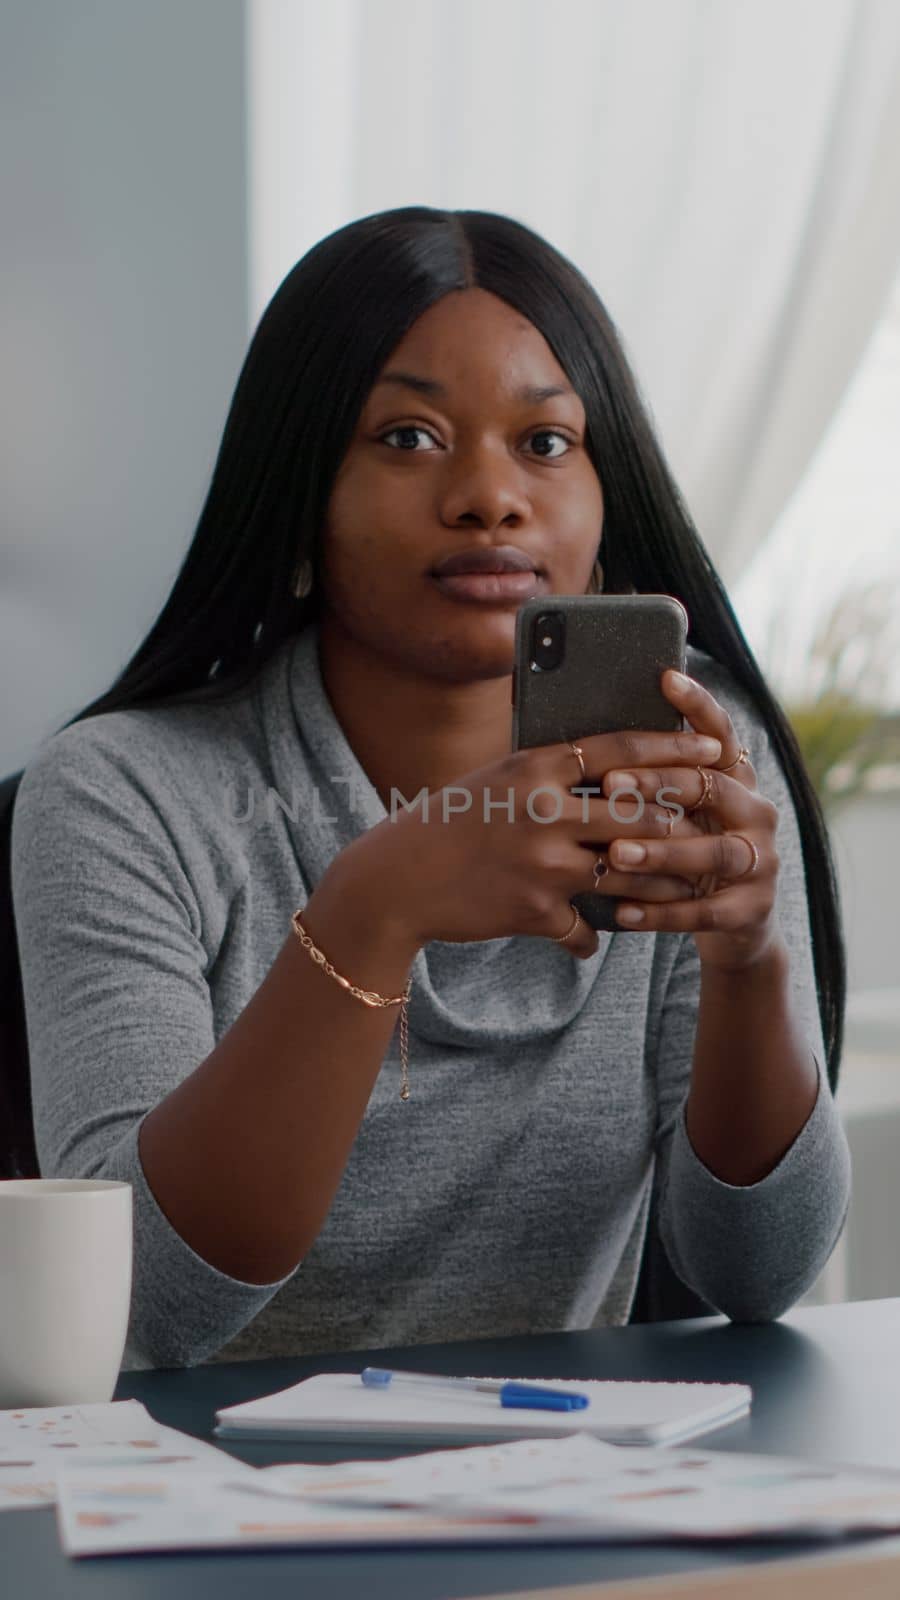 Black student holding phone in hands chatting with people browsing communication information by DCStudio